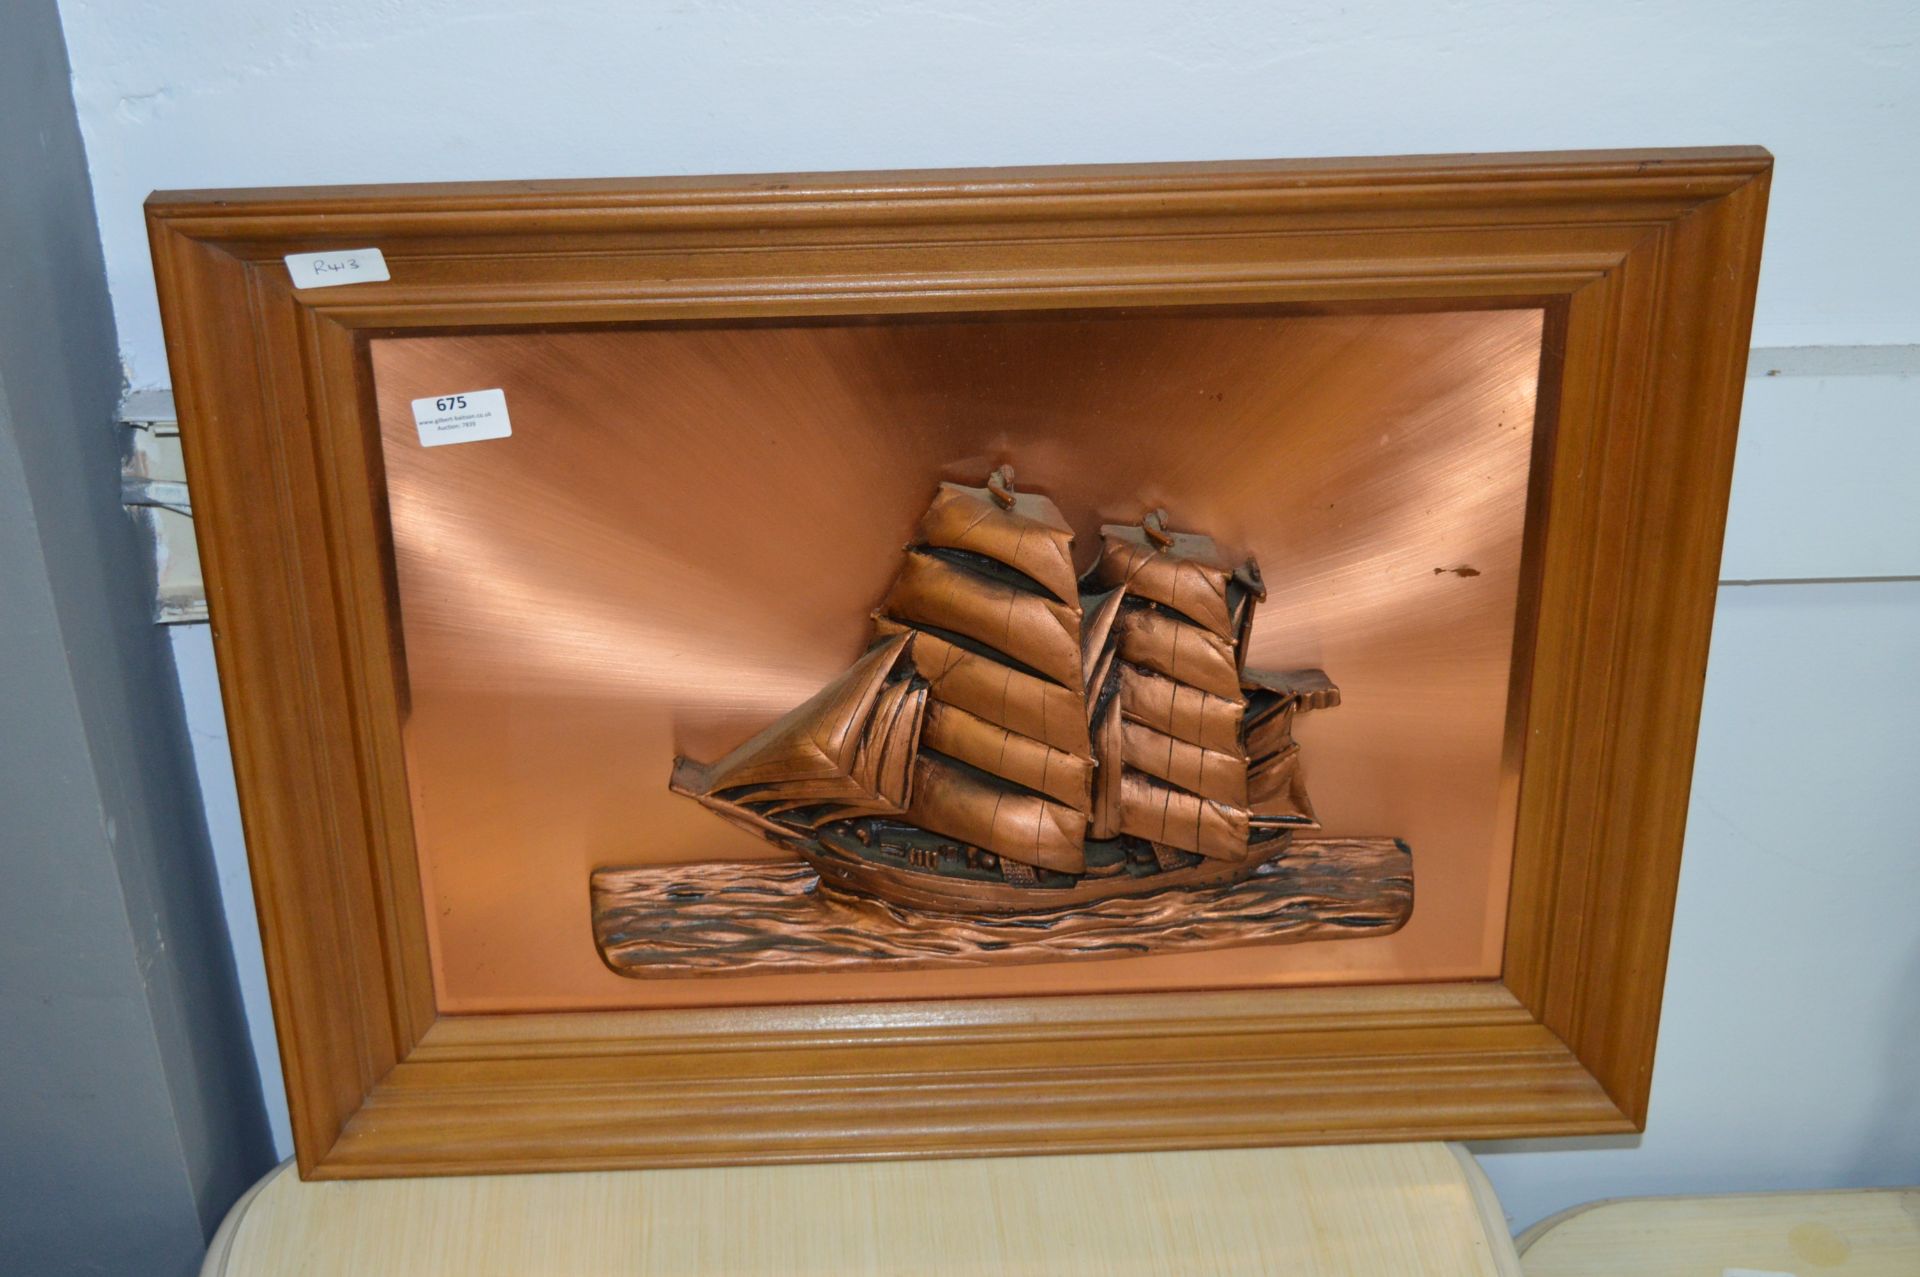 Framed Copper Embossed Picture "Sailing Ship"